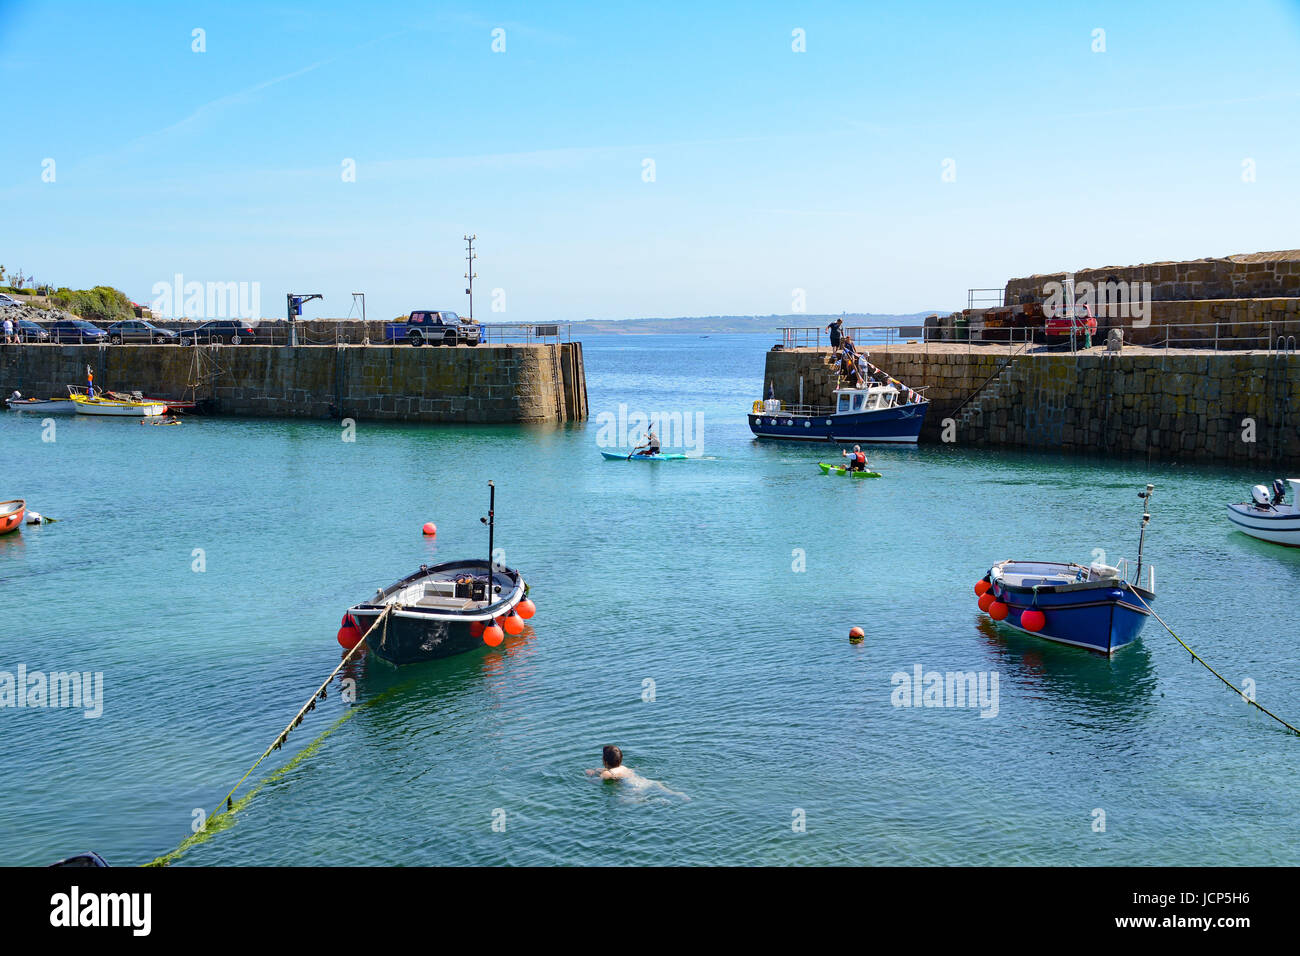 Mousehole, Cornwall, UK. 17th June, 2017. People enjoying the water and applying suncream on Saturday morning at Mousehole. Credit: cwallpix/Alamy Live News Stock Photo